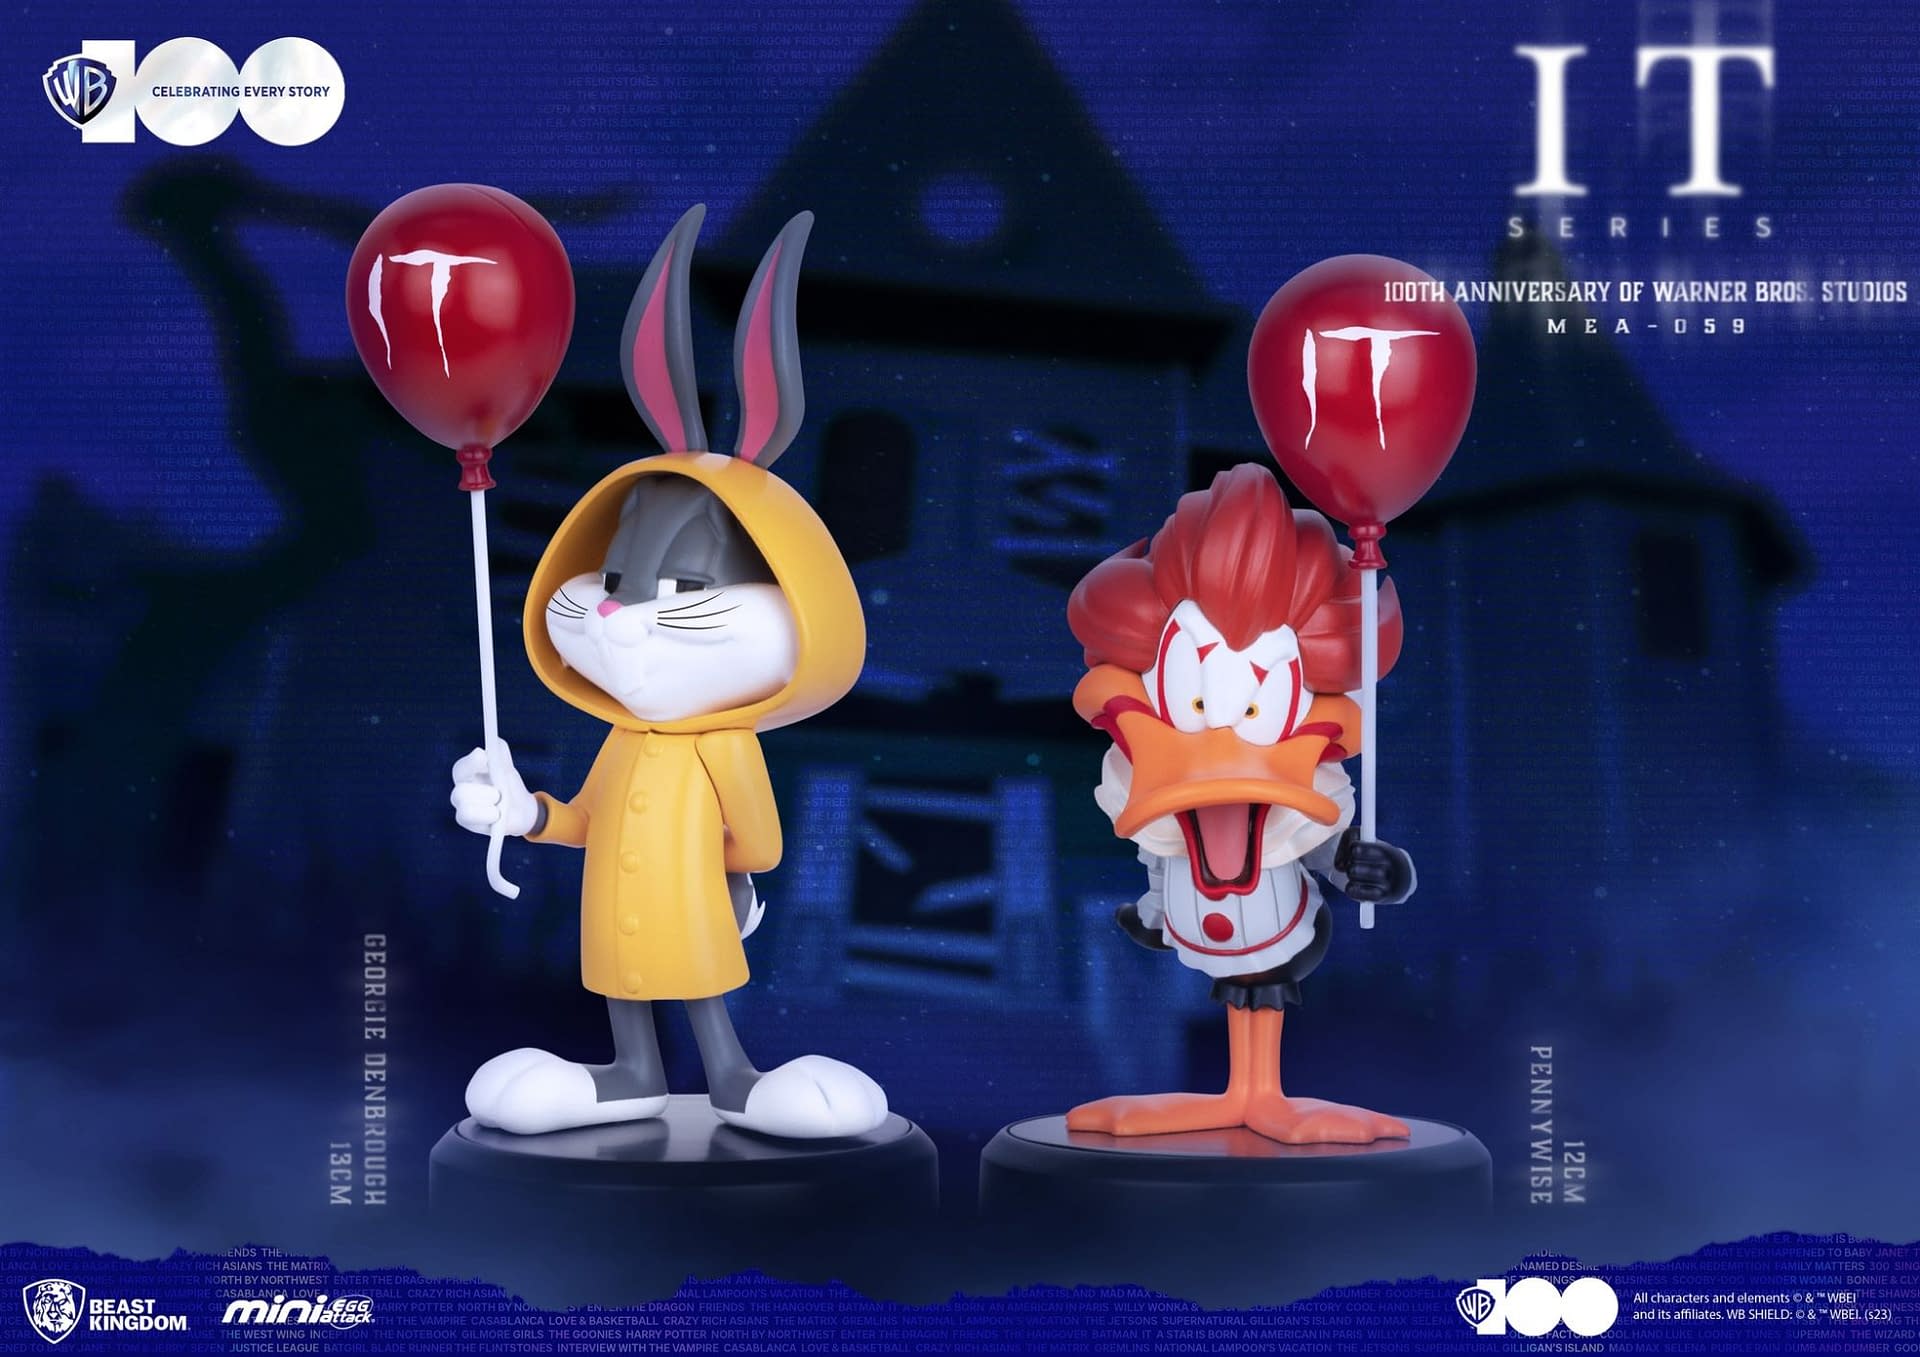 Looney Tunes x IT Crossover Figure Set Revealed by Beast Kingdom